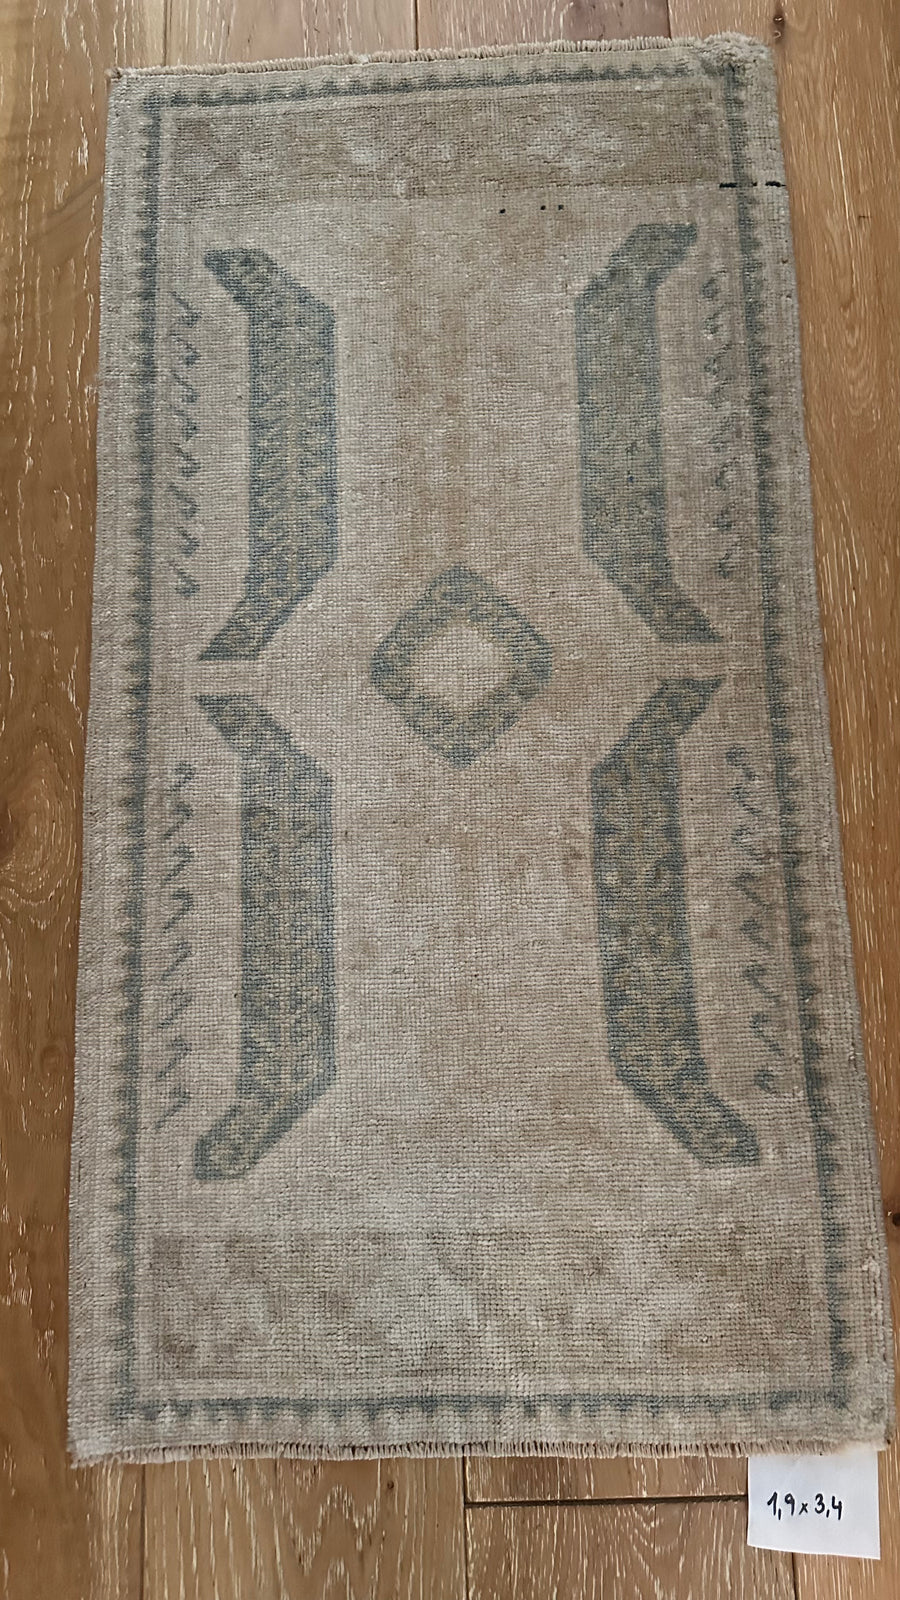 1’9 x 3’4 Antique Turkish Rug Muted Sea Foam, Beige and Camel